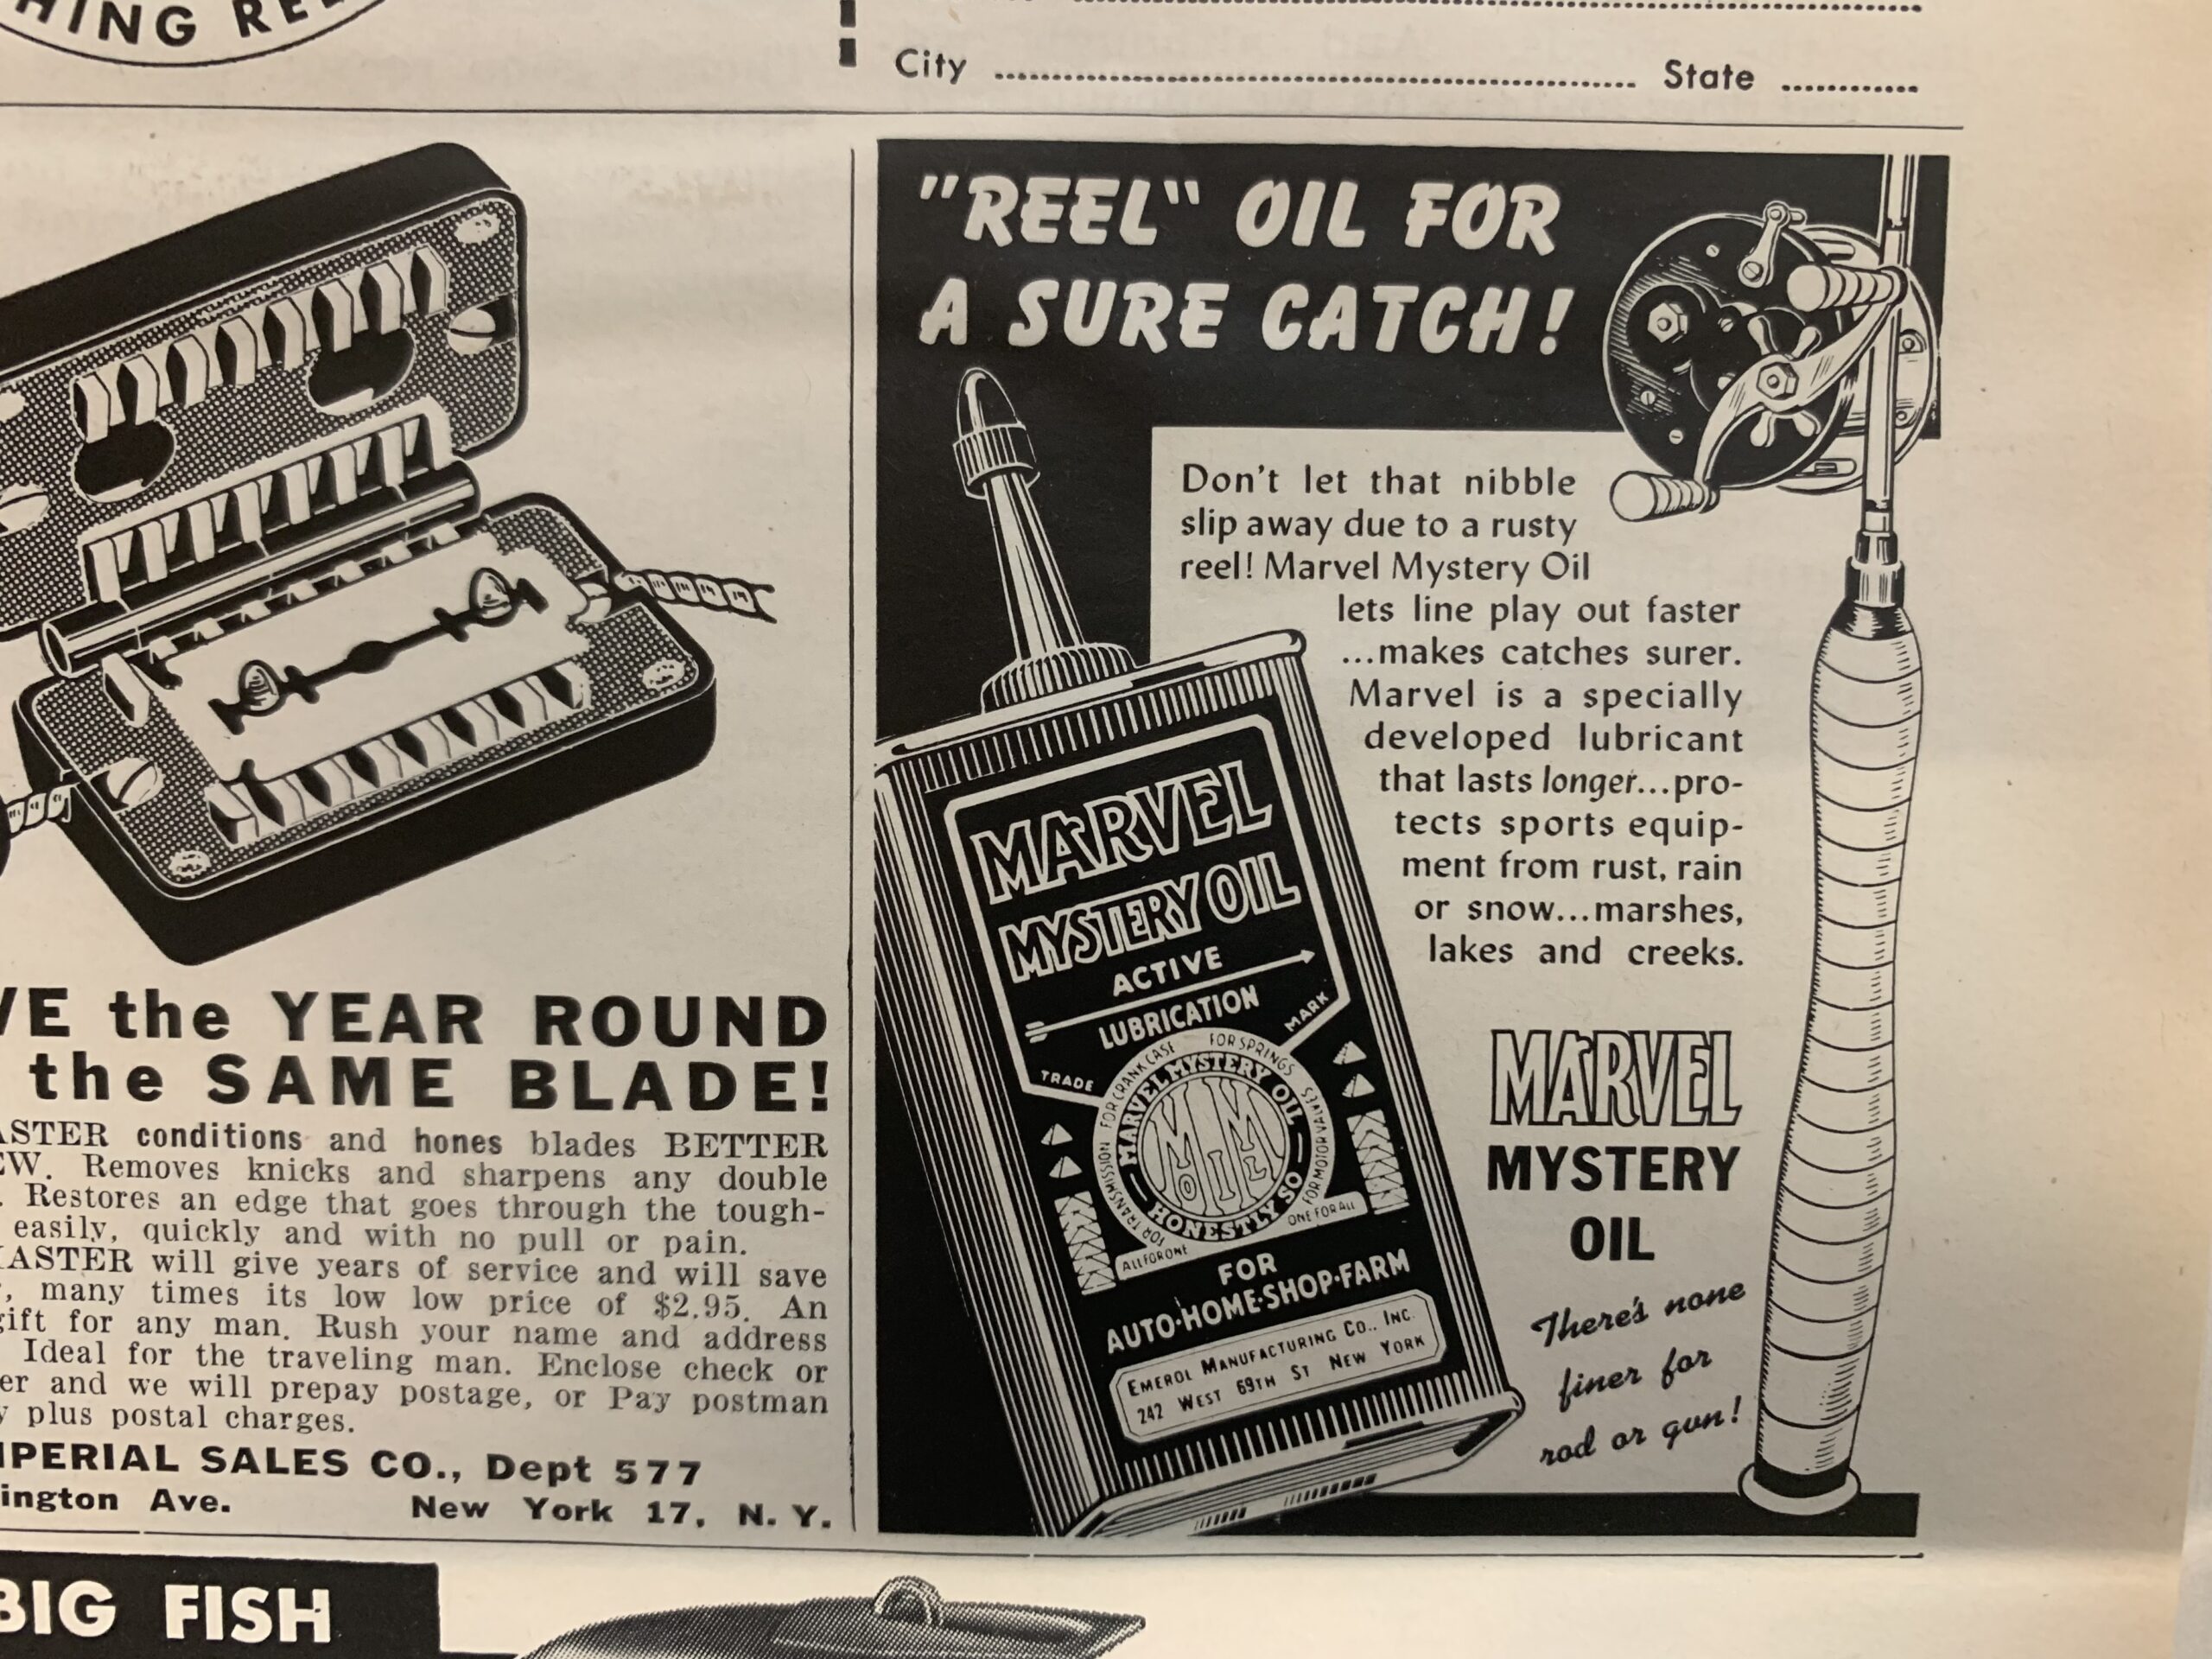 Vintage Outdoor Life Ads That You Can't Make Up